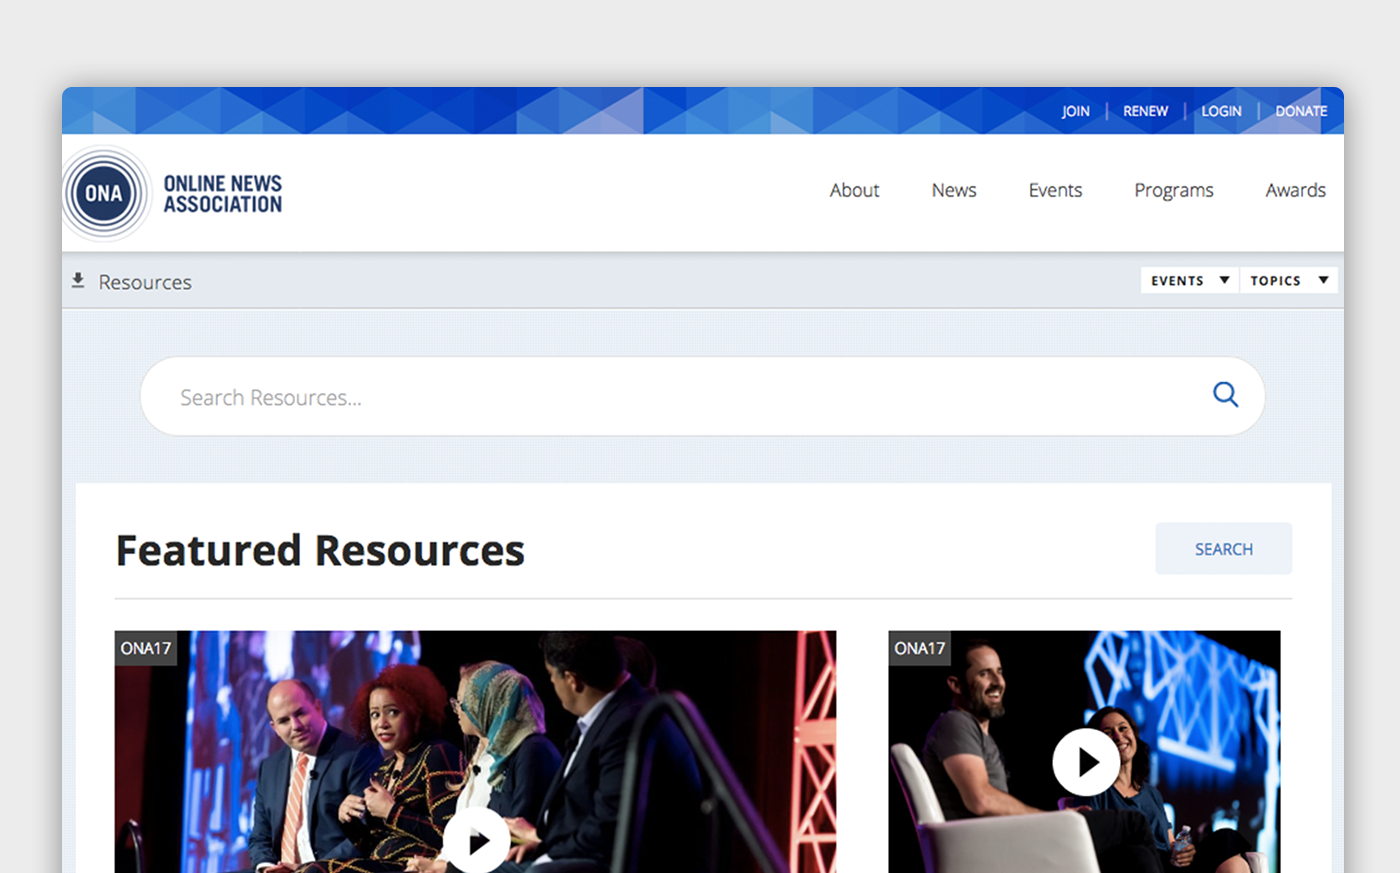 A screenshot of the Featured Resources portal page on the ONA site, with a search bar and navigation links